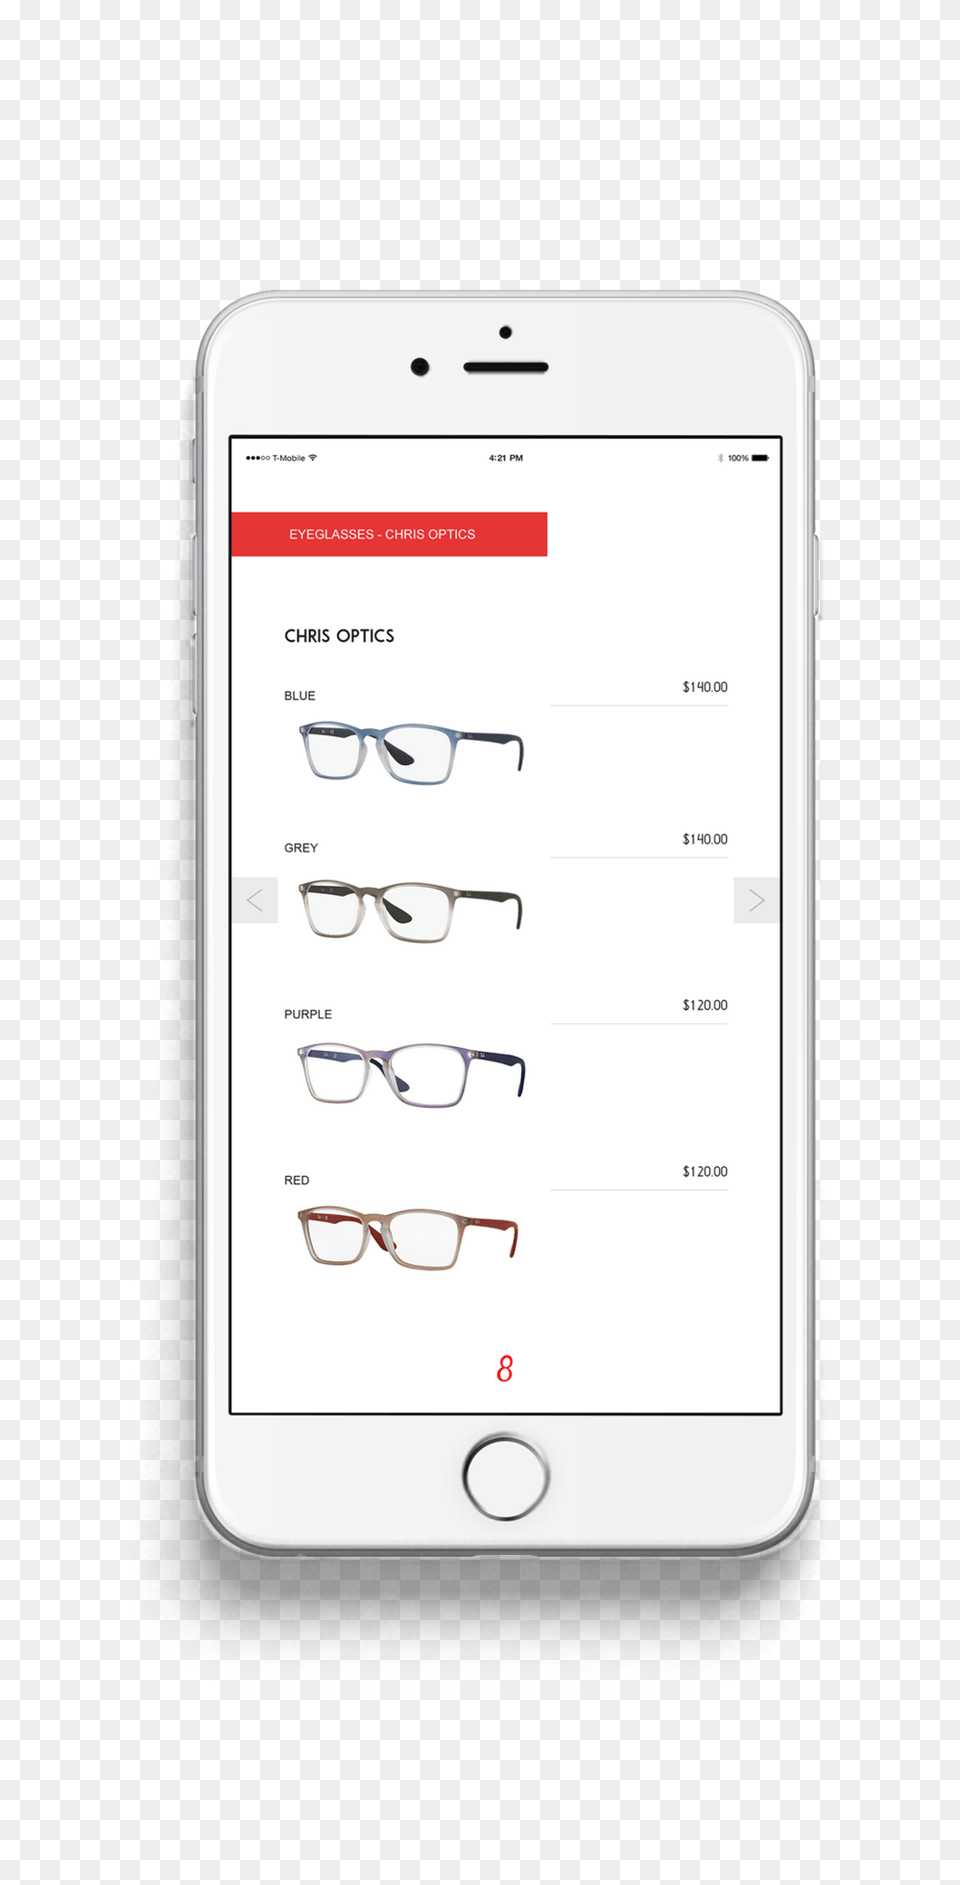 Download Iphone Mockup Image With No Background Pngkeycom Glasses, Accessories, Electronics, Mobile Phone, Phone Png